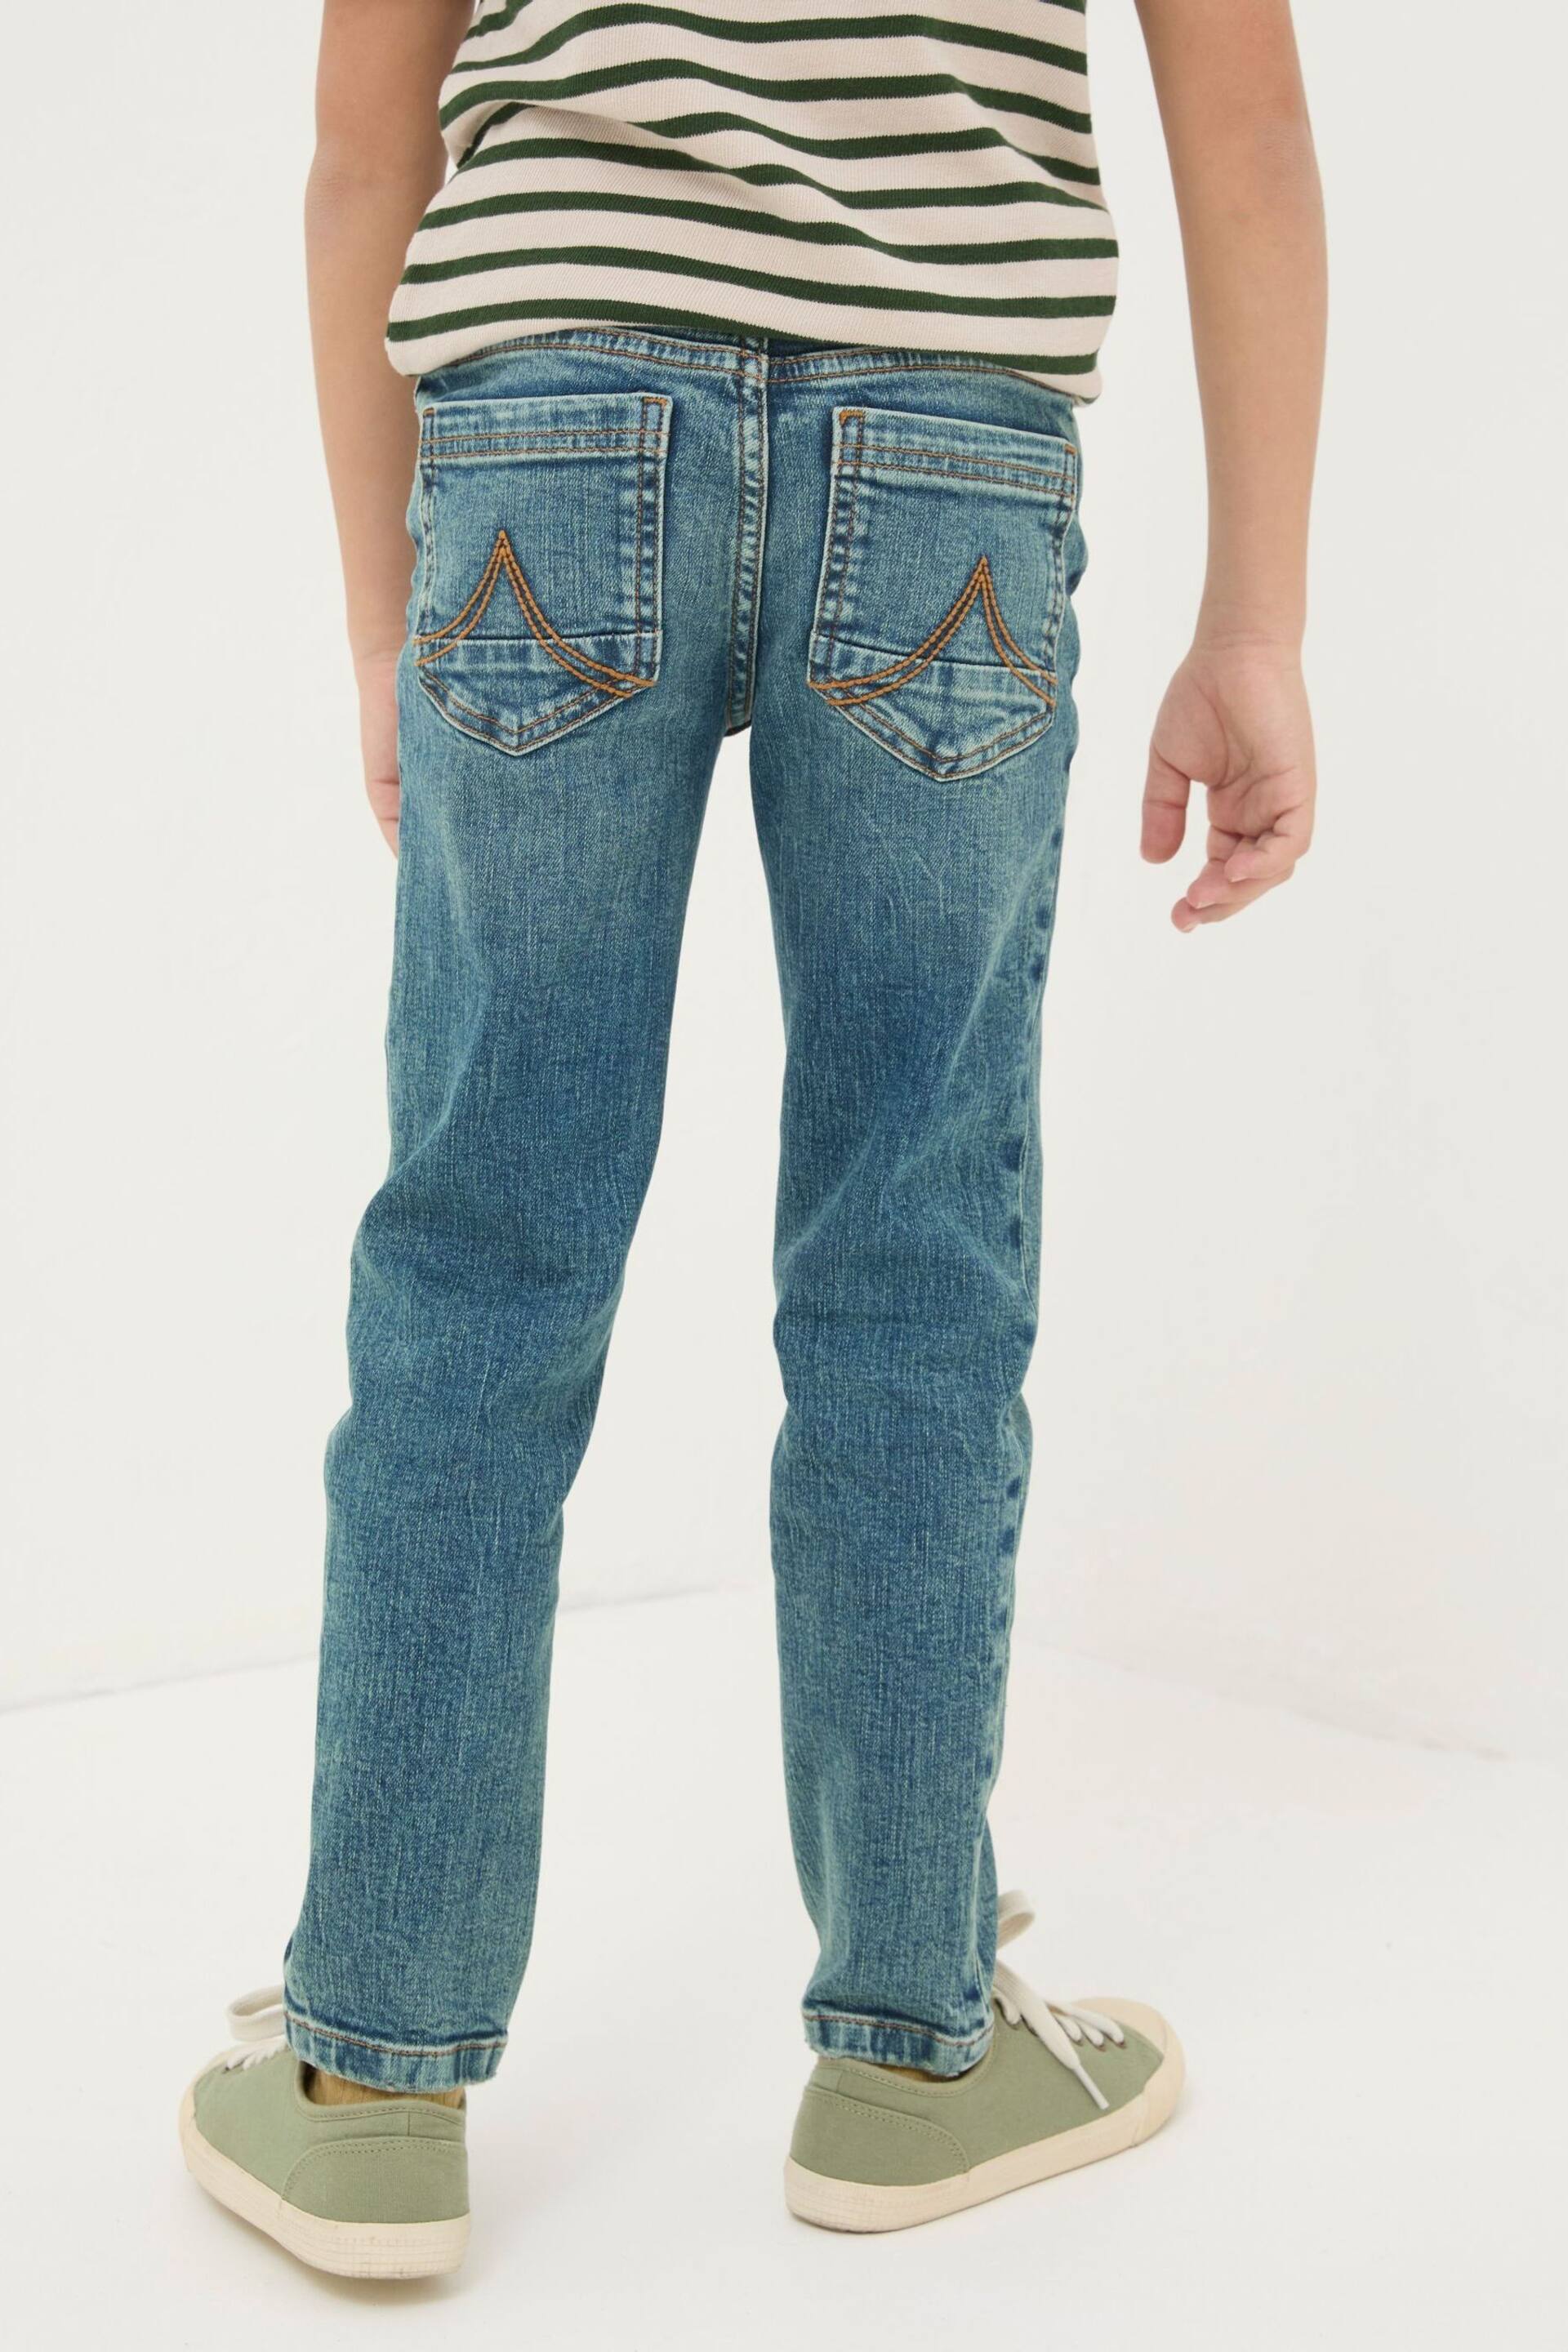 FatFace Blue Slim Seth Washed Jeans - Image 2 of 5